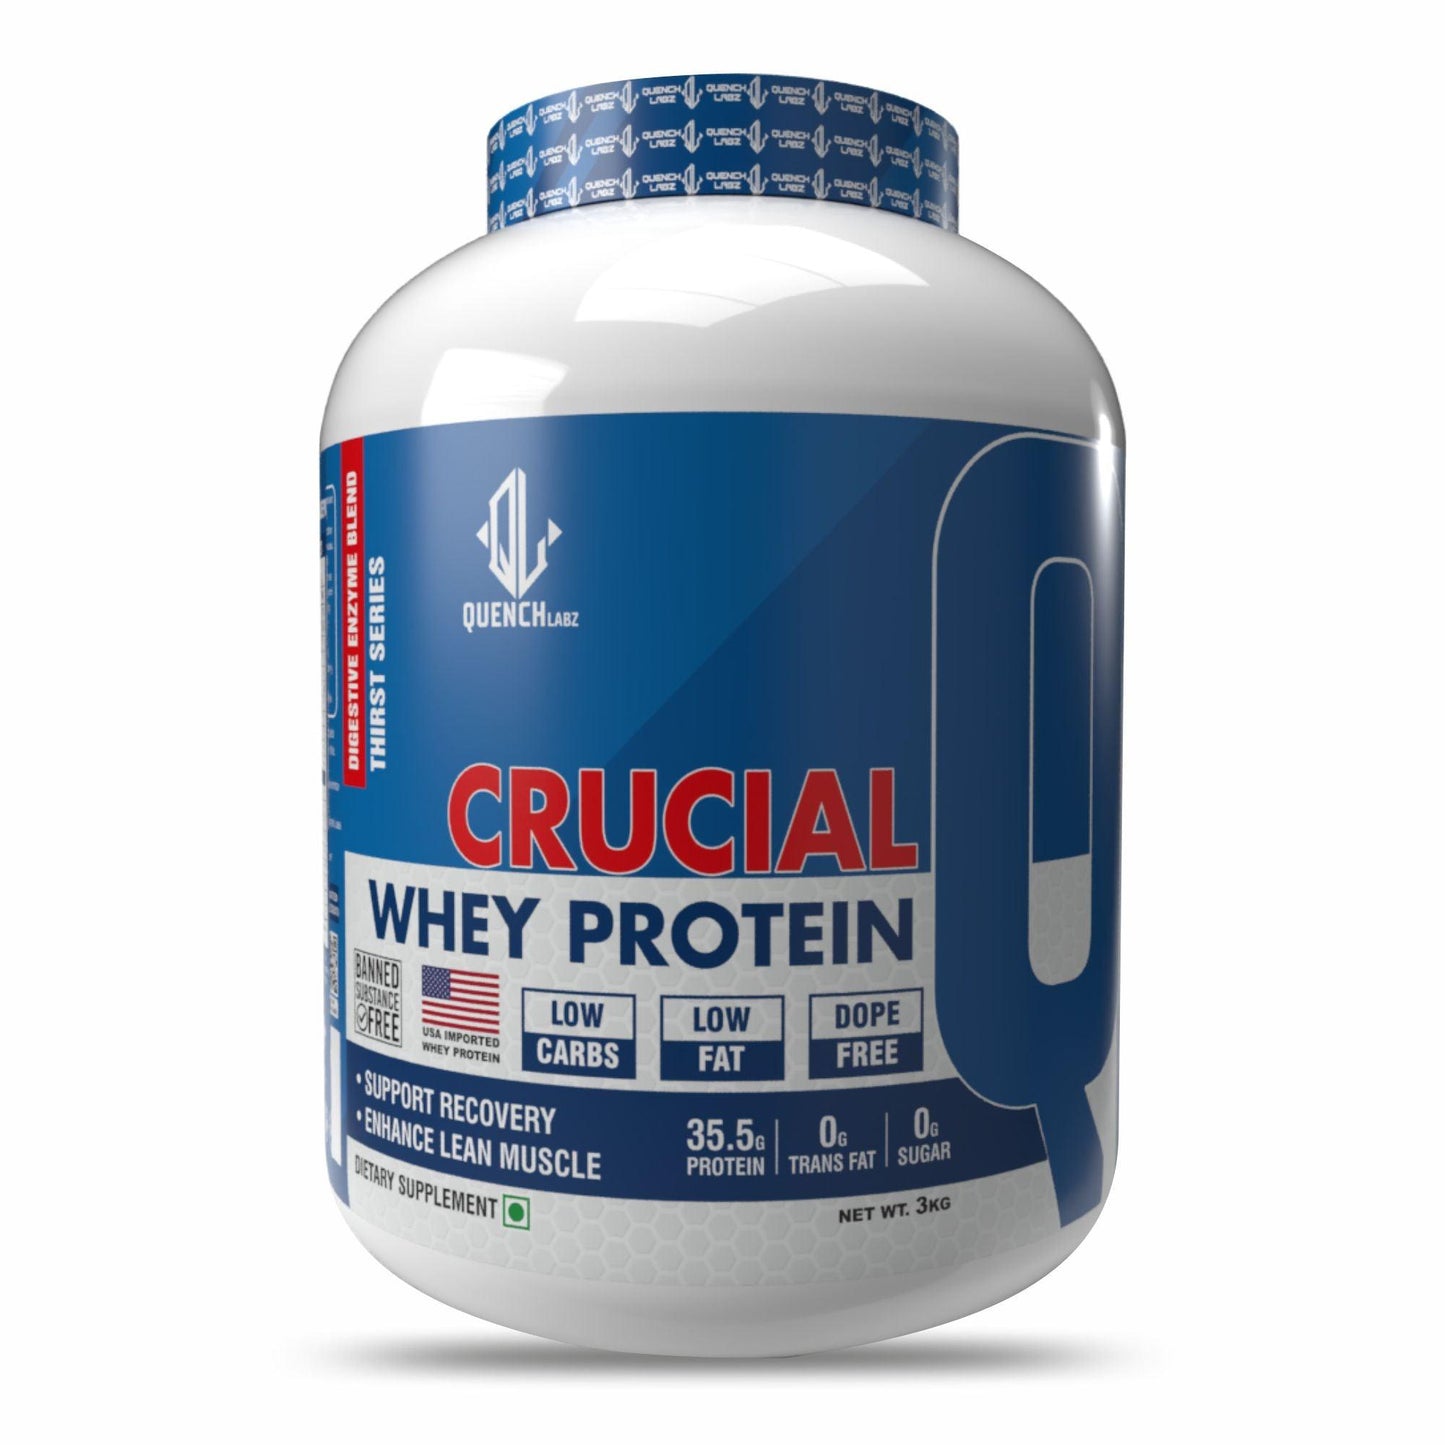 Crucial Whey Protein | Low Carb | 35.5 G Protein - Quenchlabz